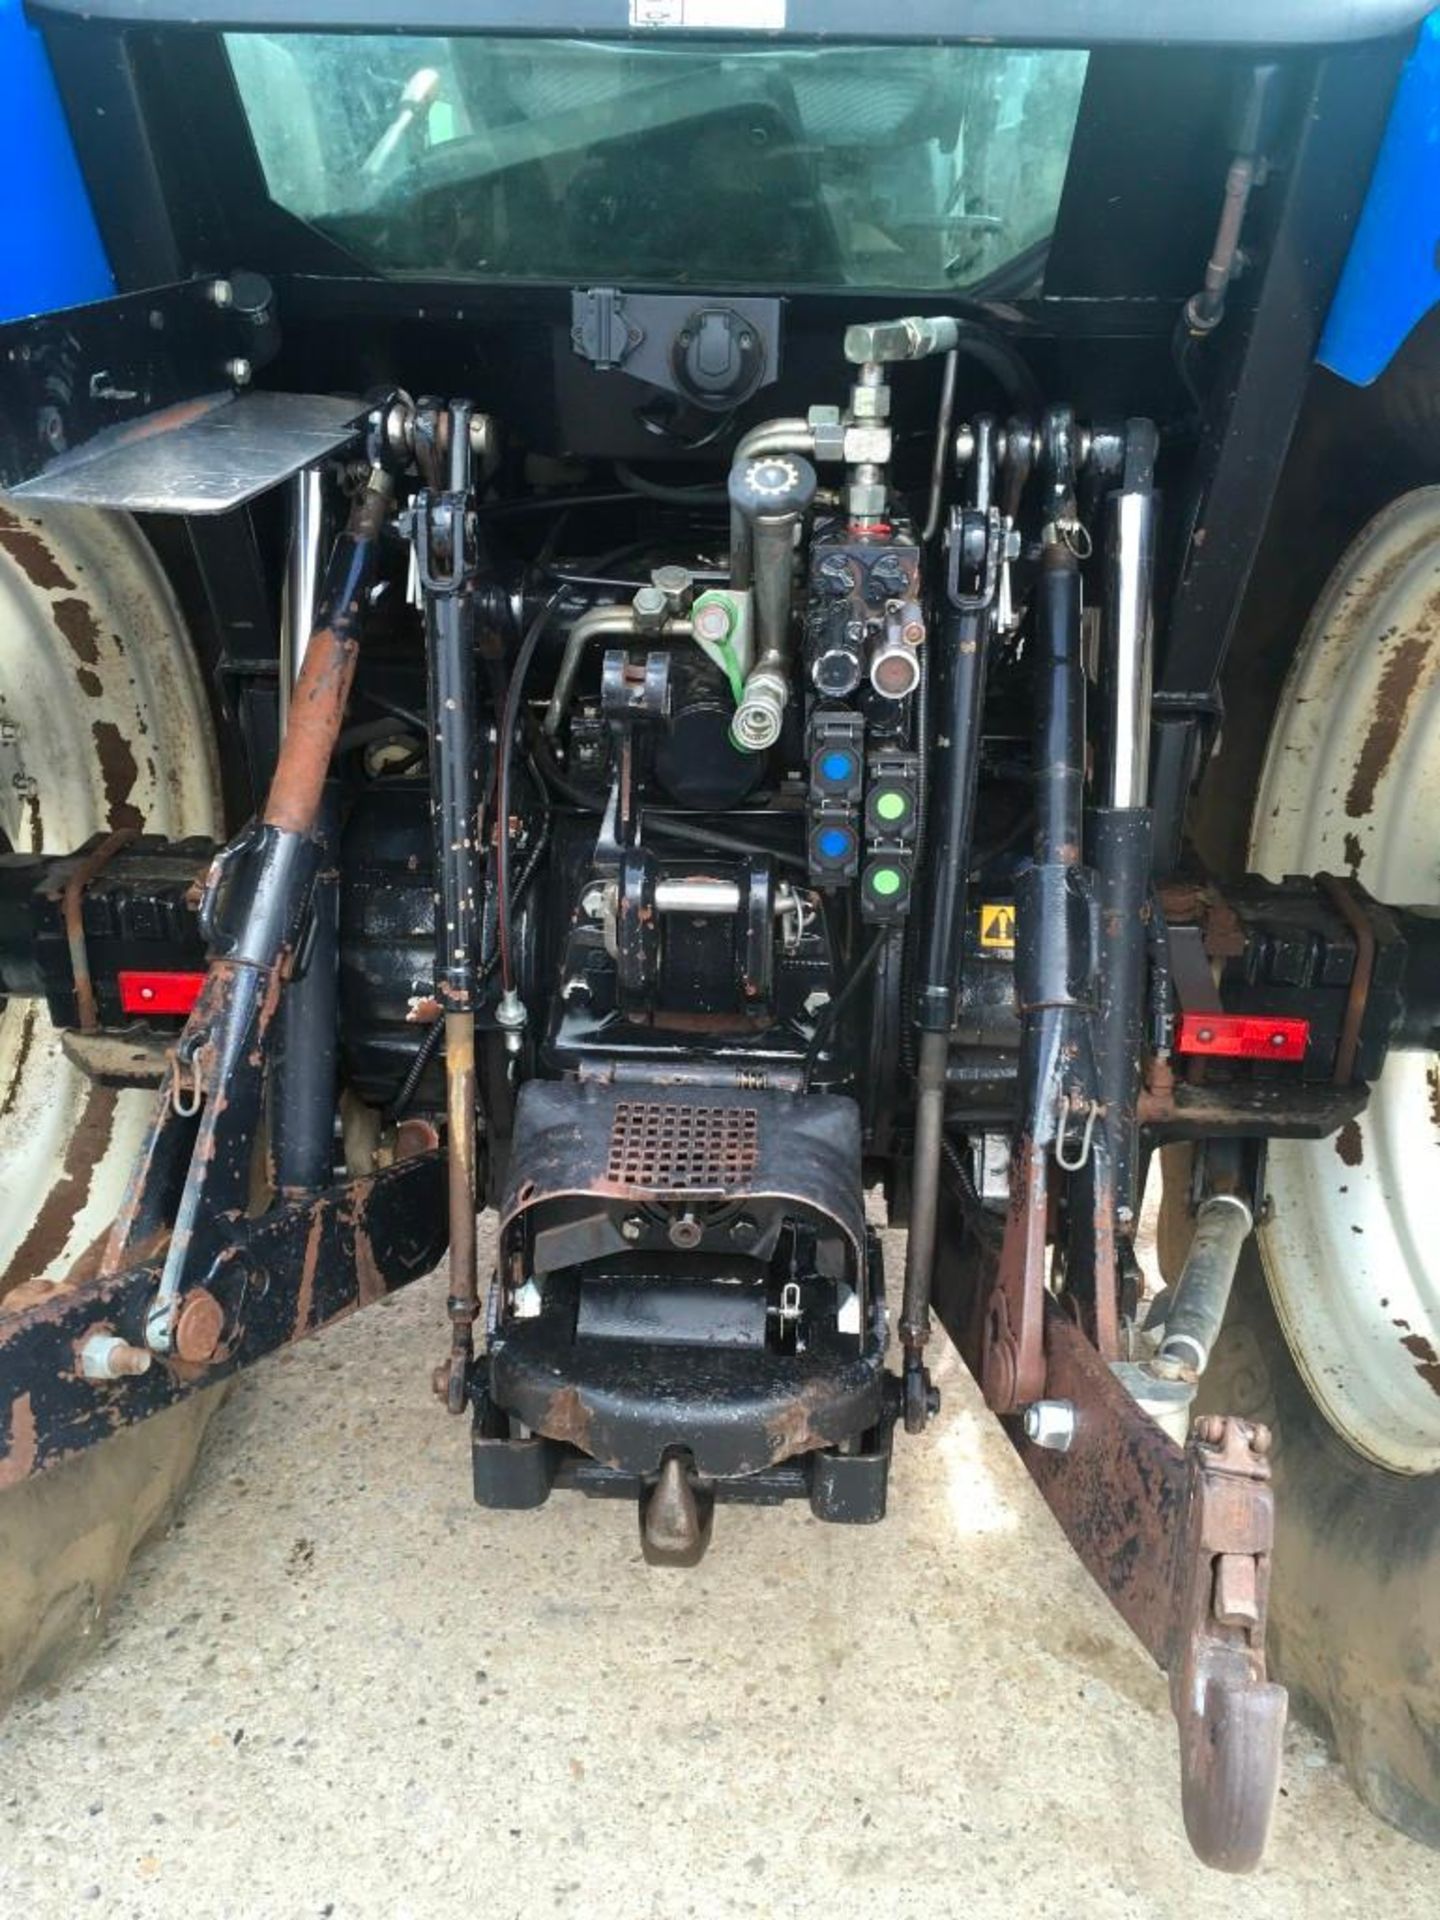 2003 New Holland TS115 tractor with Mailleux MX120 front loader. 2 spool valves, rear link arms and - Image 7 of 13